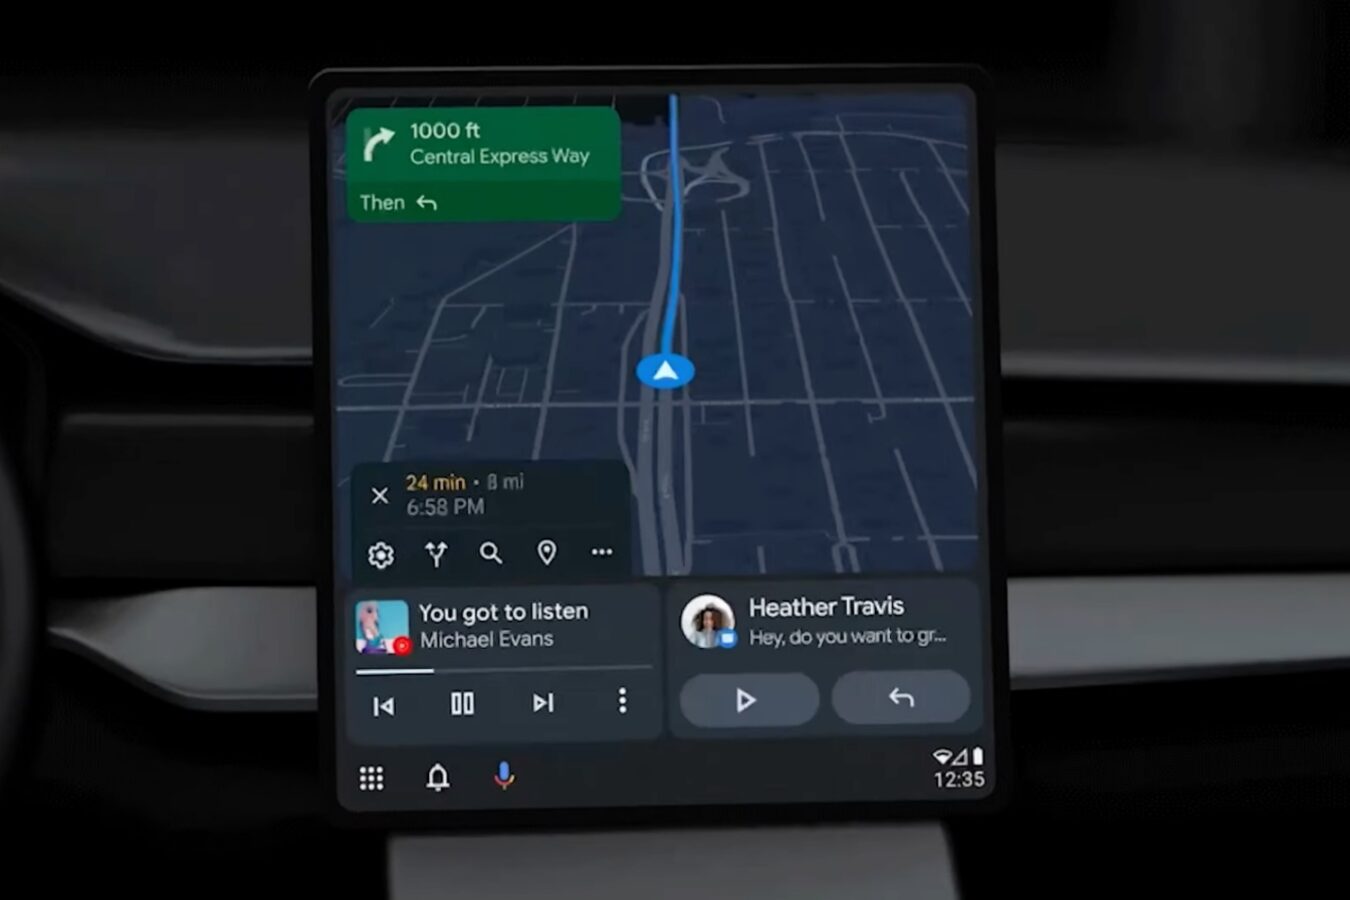 Nowy Android Auto